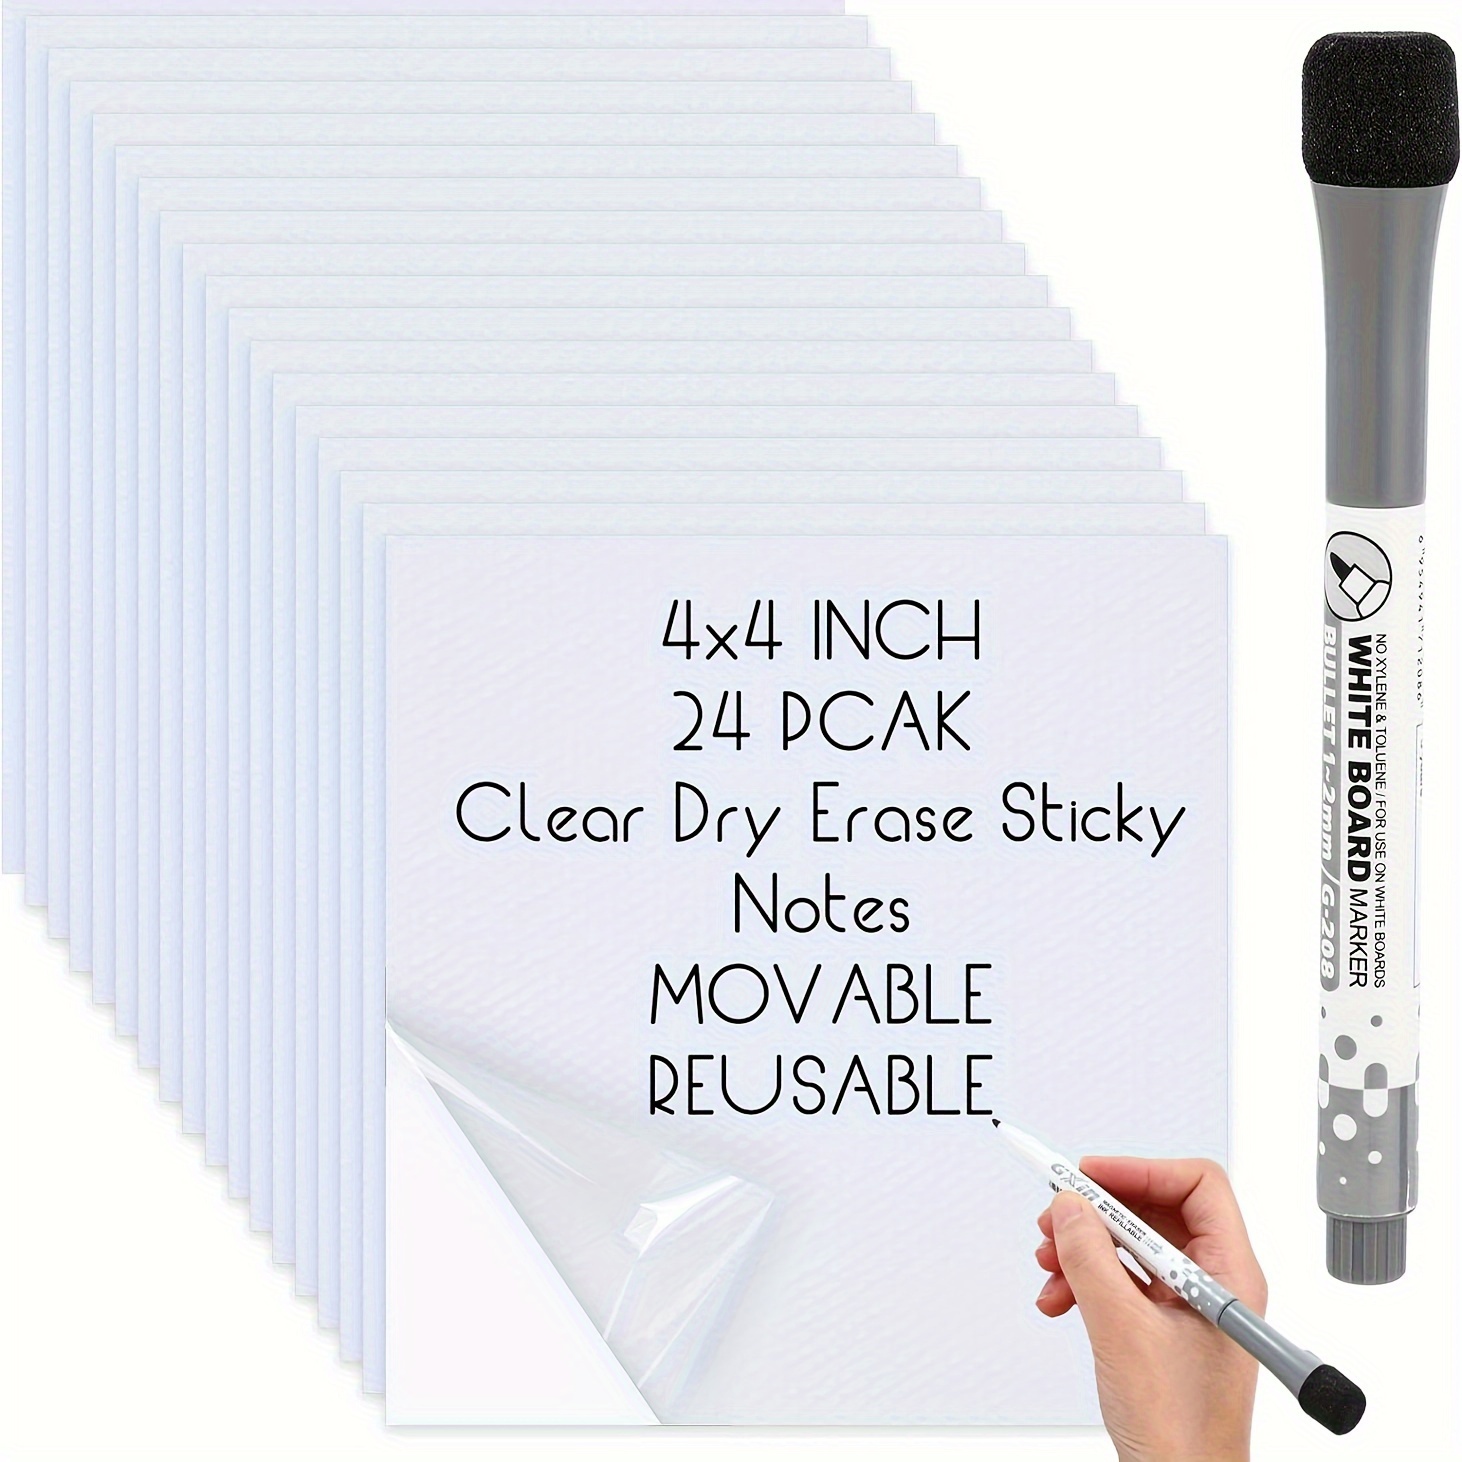 Reusable Dry Erase Sticky Notes - 6 Pack of 4x4 Multi Color Post It Notes  - Small White Board Dry Erase Stickers - 2 Magnetic Whiteboard Markers